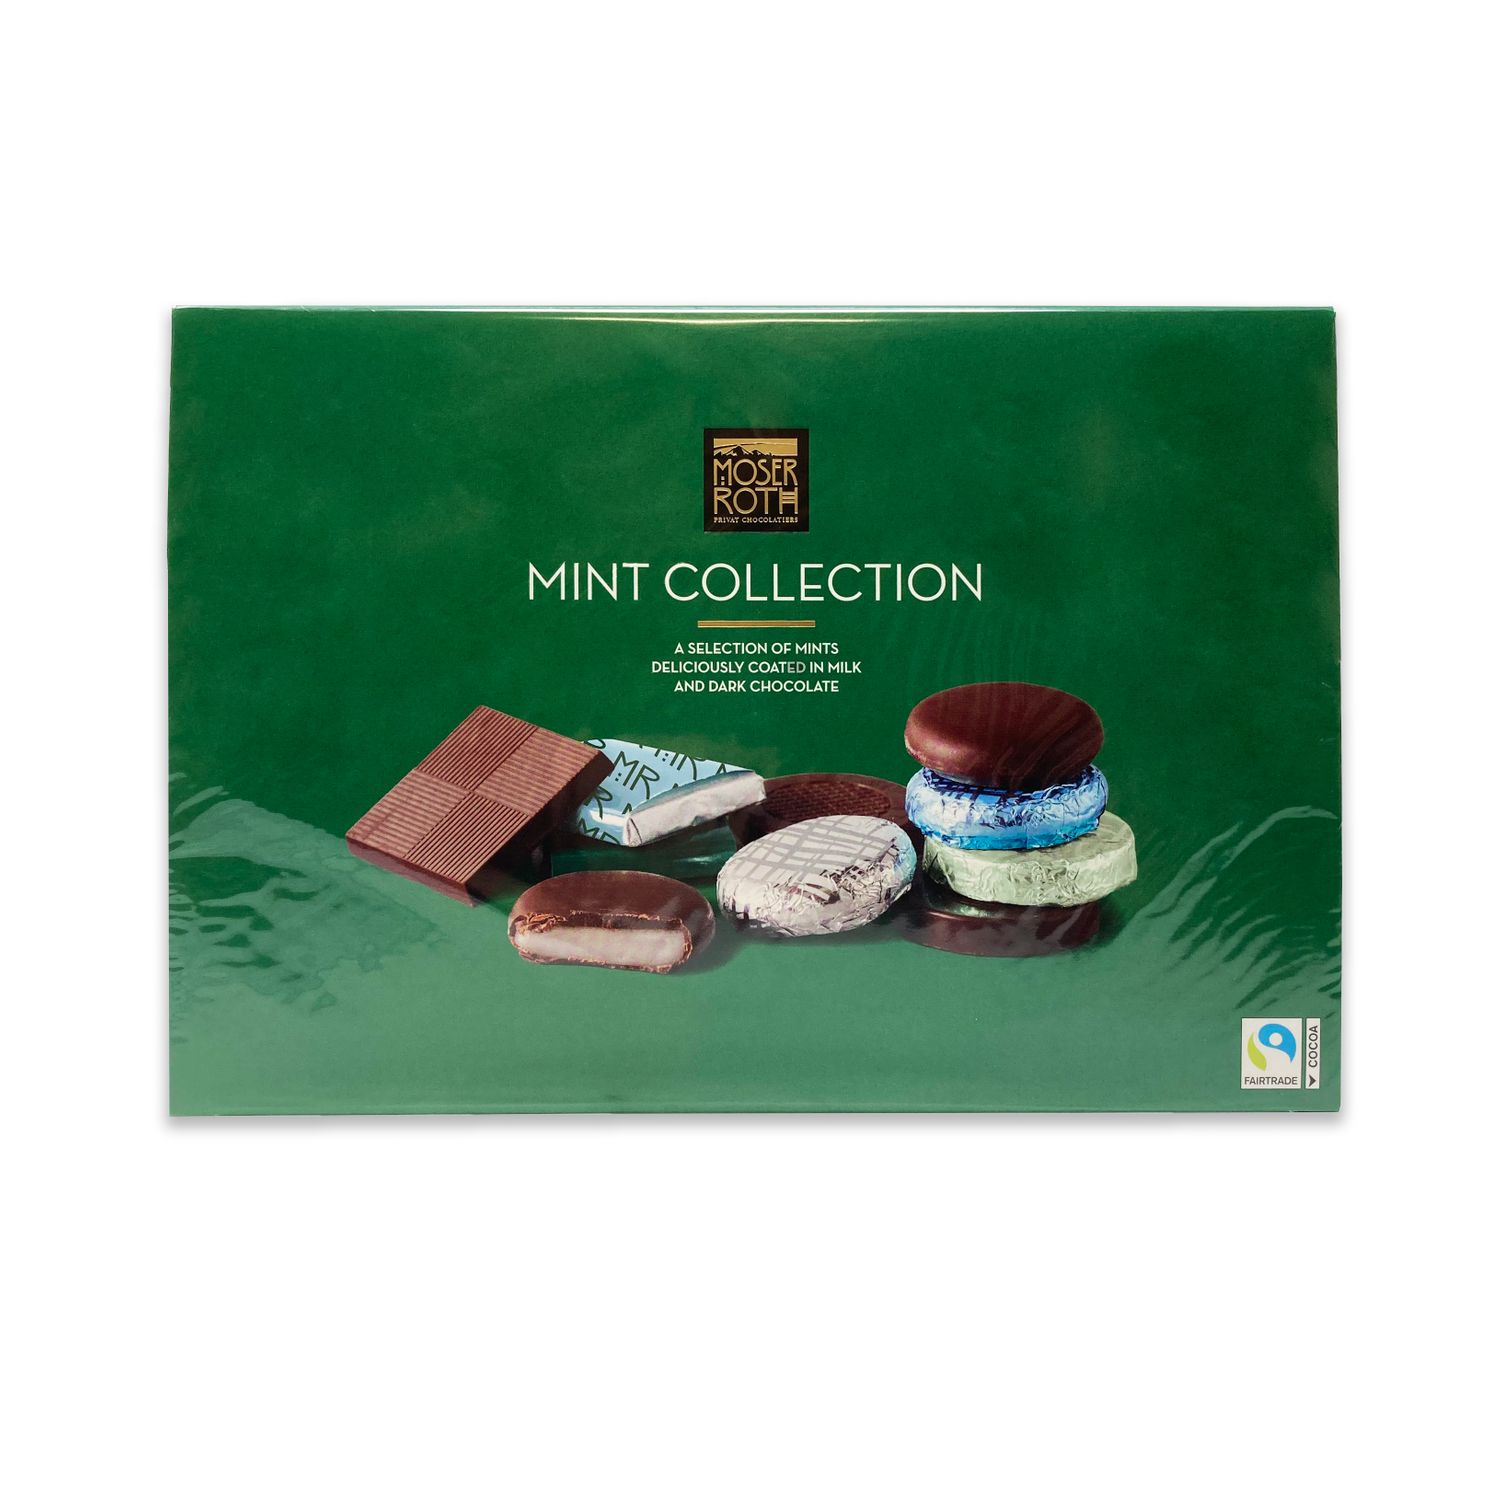 Moser Roth Classic Mint Collection 178g Aldi